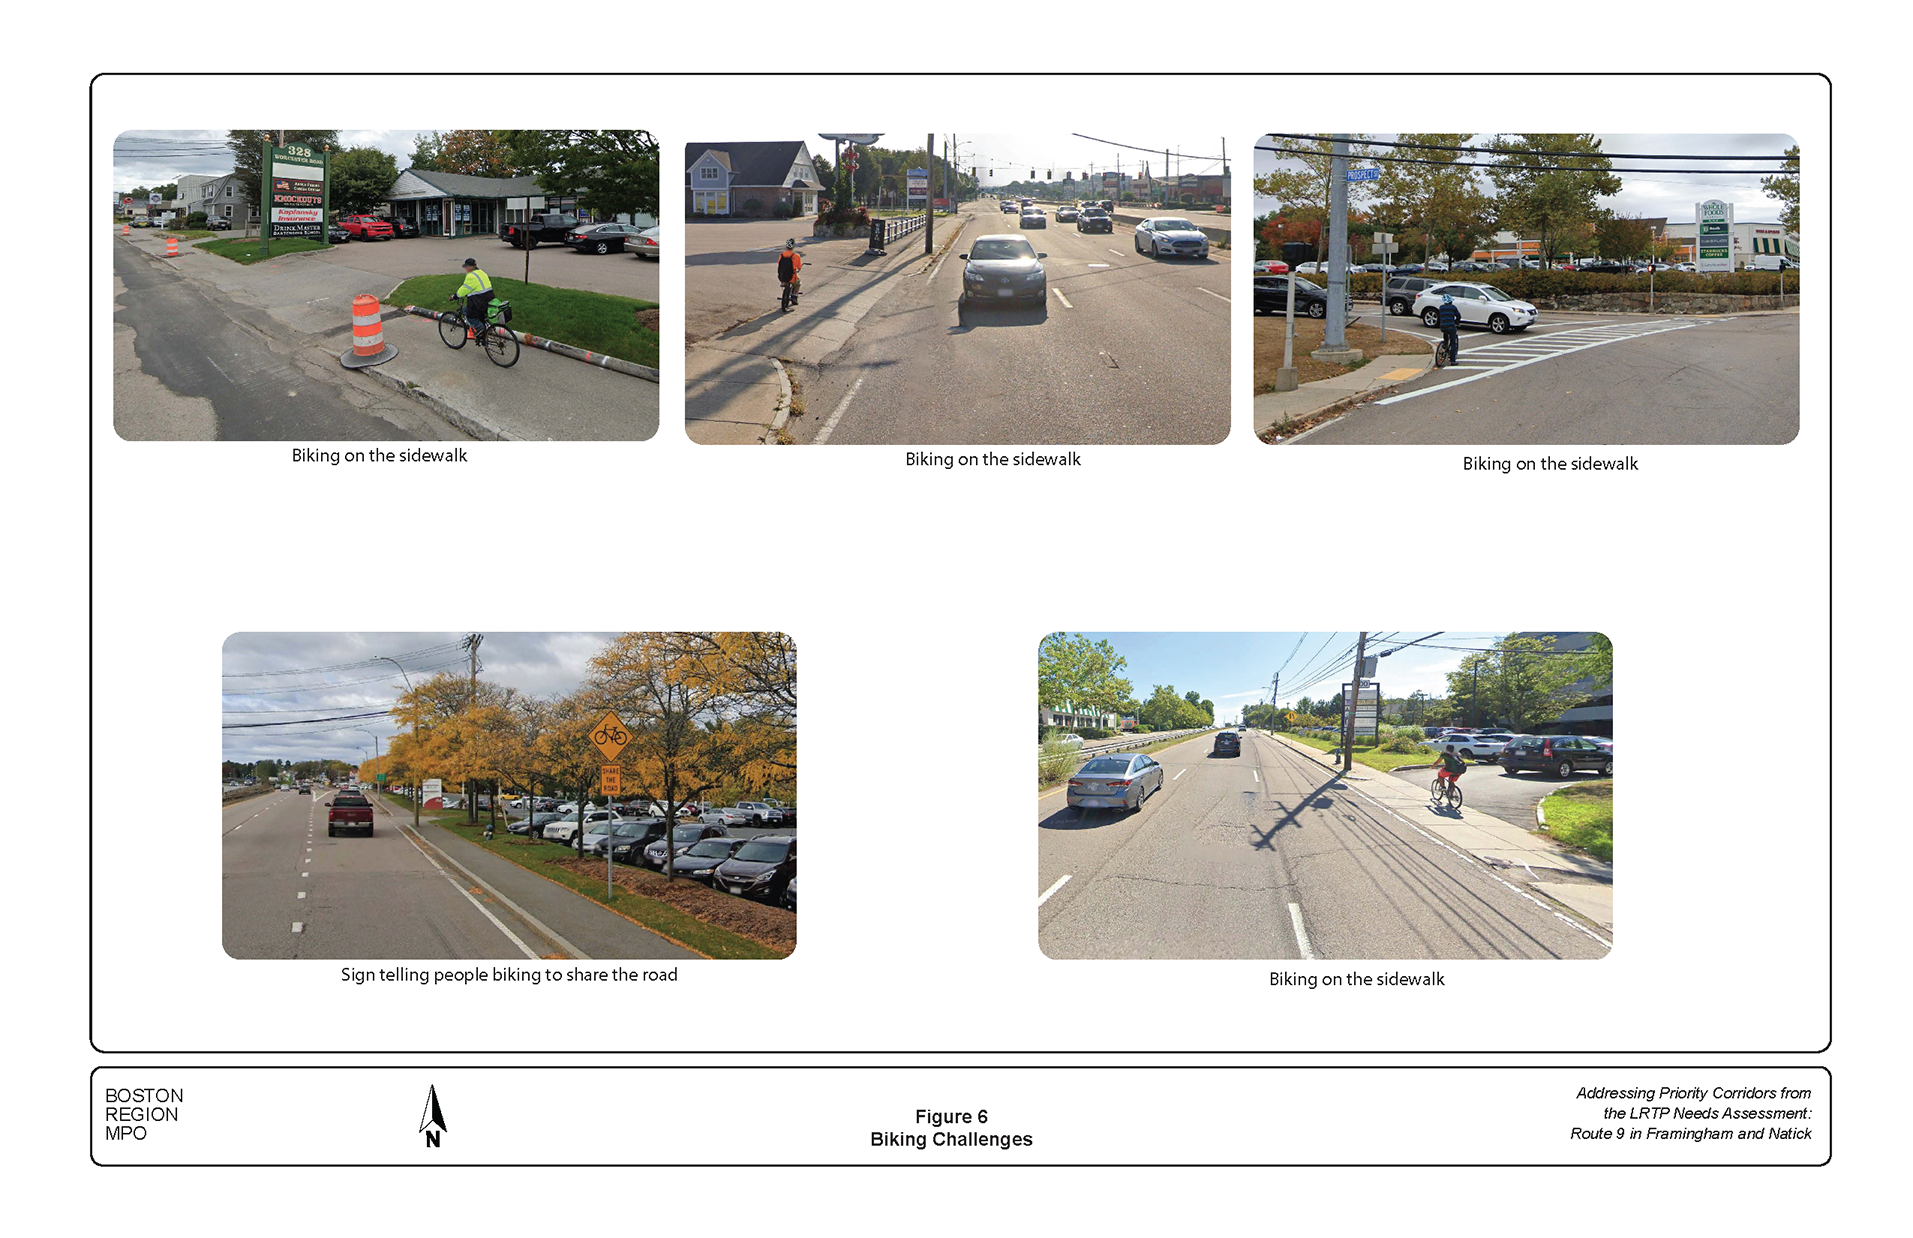 Figure 6 includes photos illustrating challenges for people biking in the Route 9 corridor